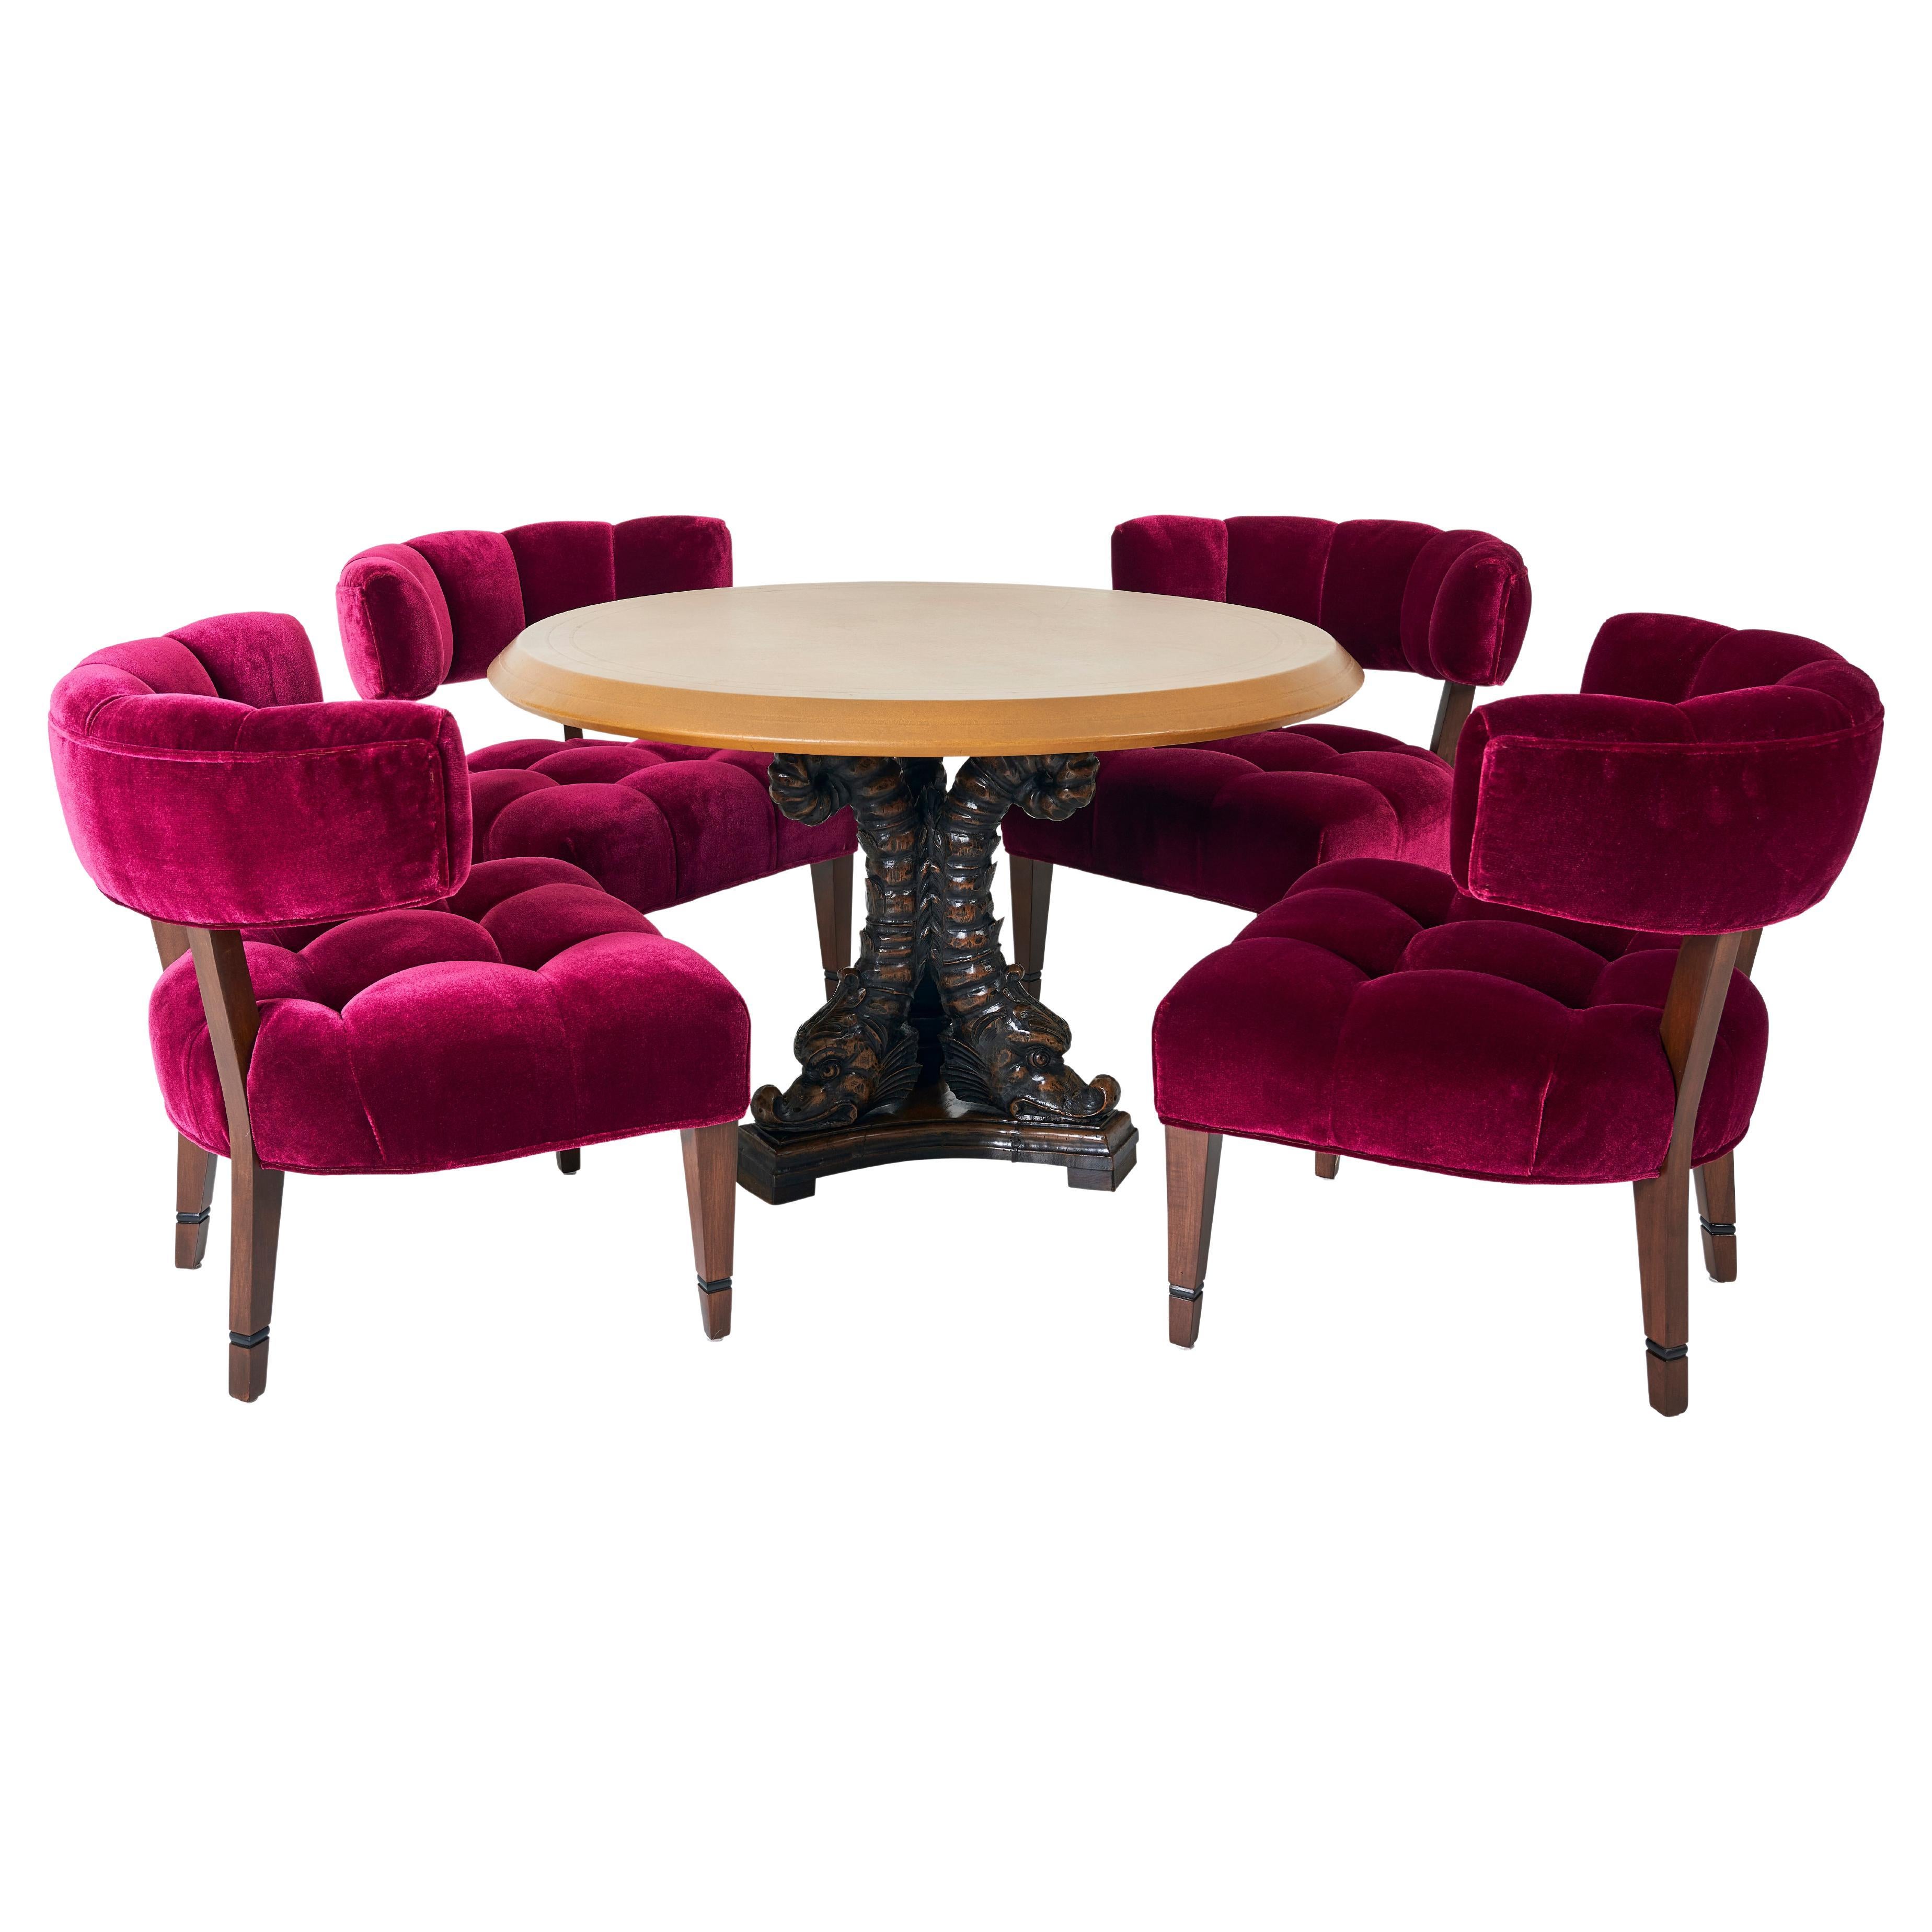 "Gemütlich" Leather Clad Table and 4 Bergundy Brentwood Chairs by William Haines For Sale